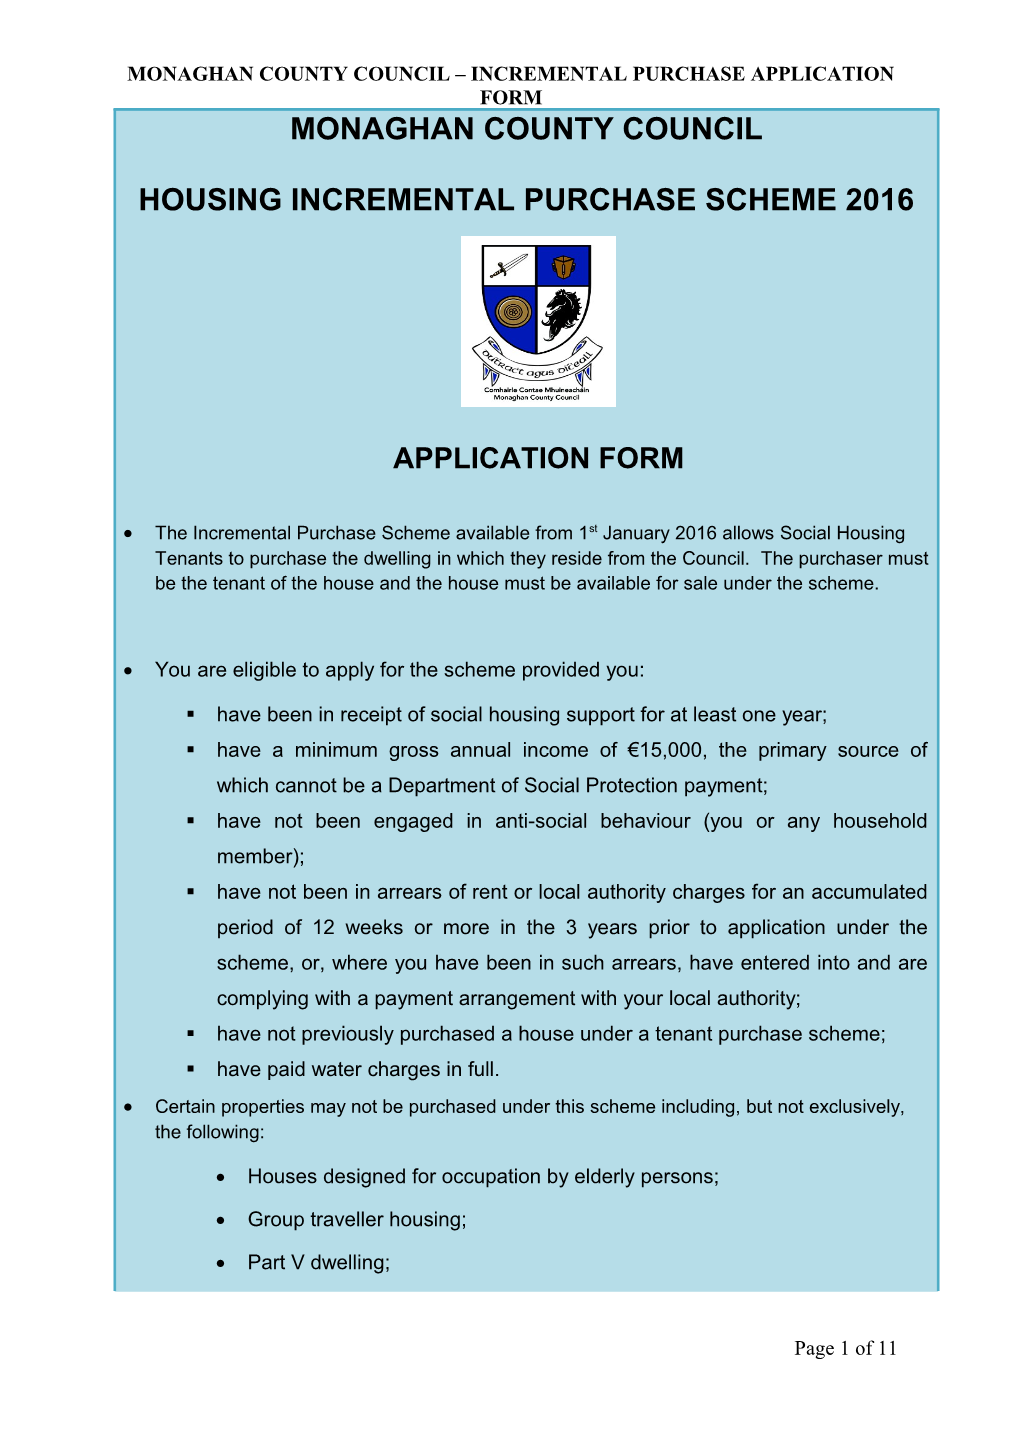 Monaghan County Council Incremental Purchase Application Form